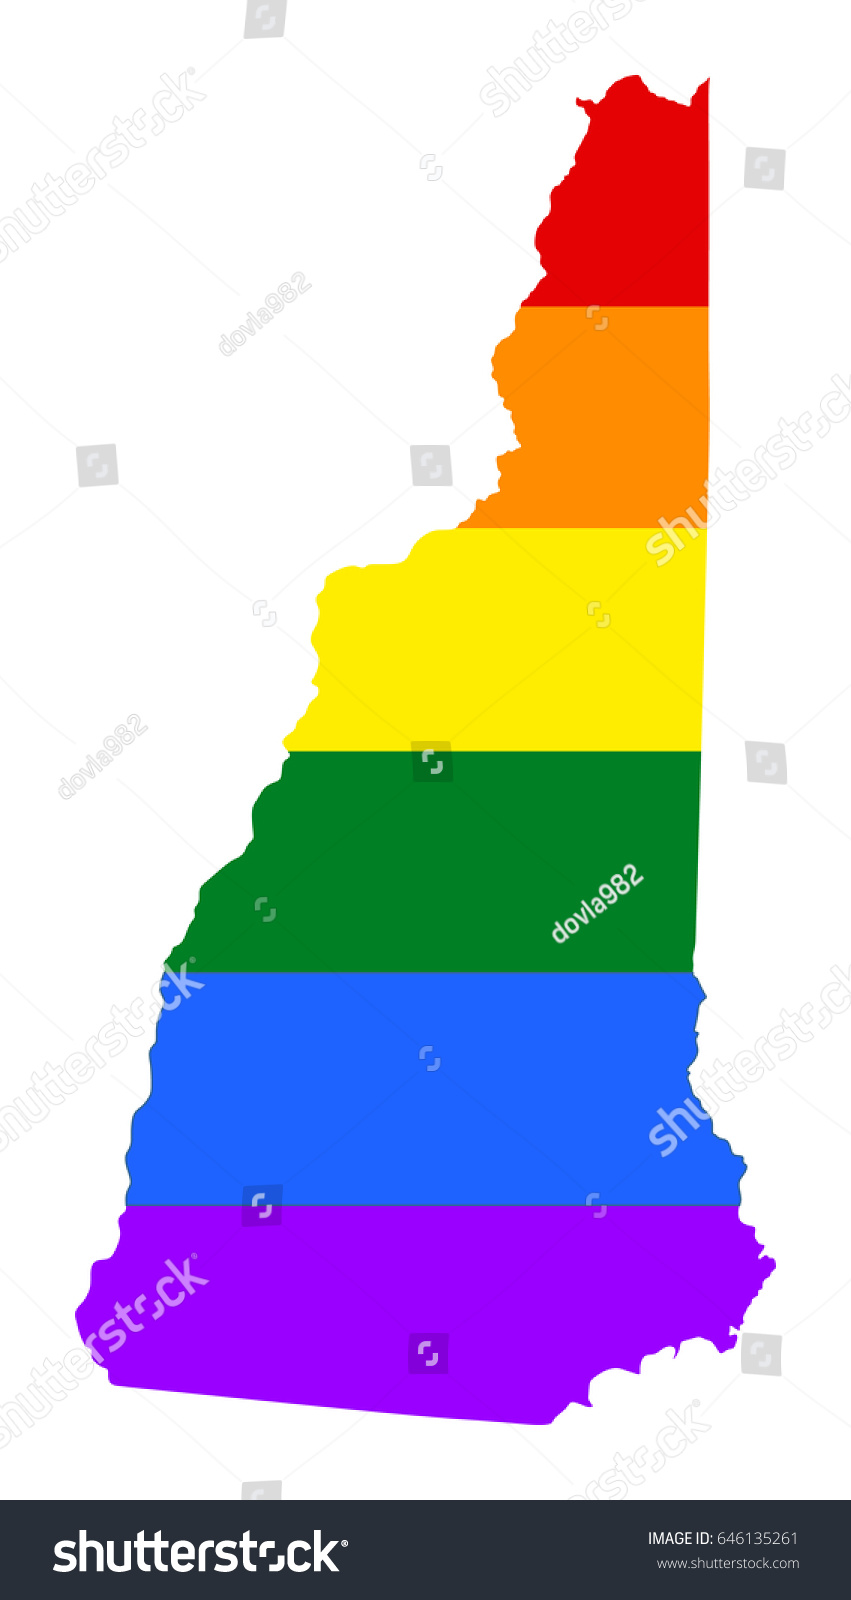 New Hampshire pride gay map with rainbow flag Royalty Free Stock